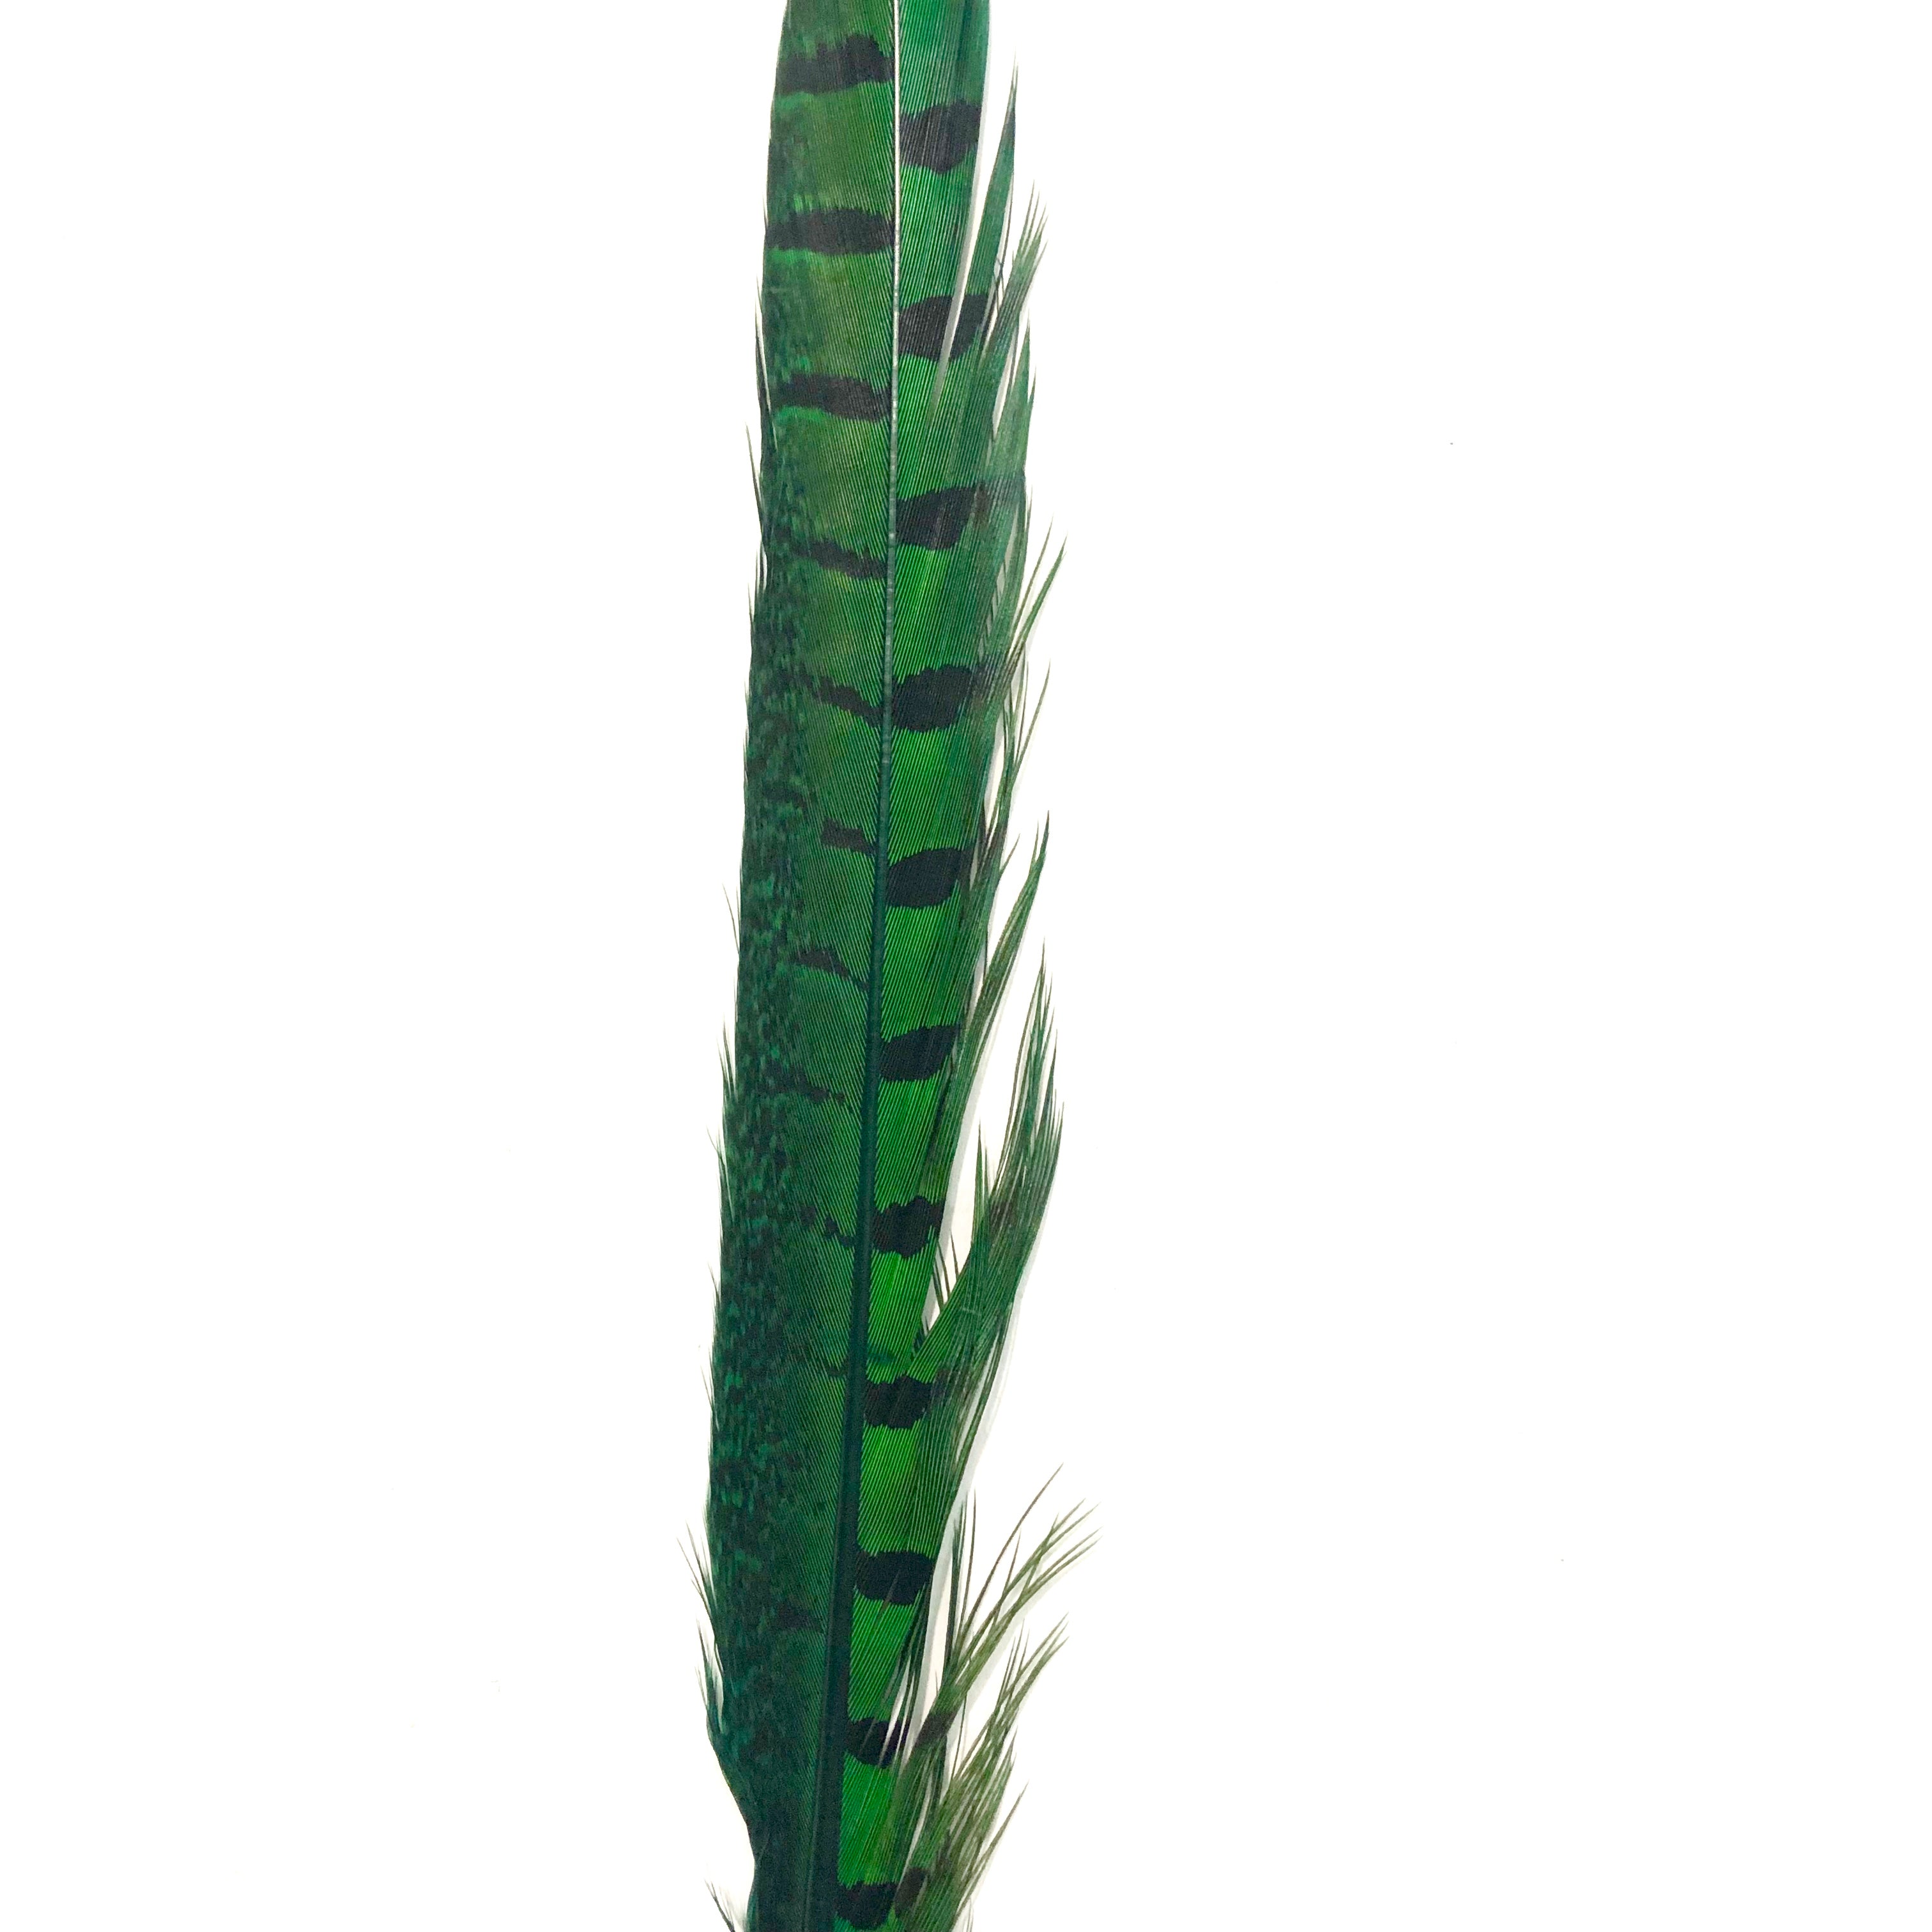 10" to 20" Ringneck Pheasant Tail Feather - Green ((SECONDS))